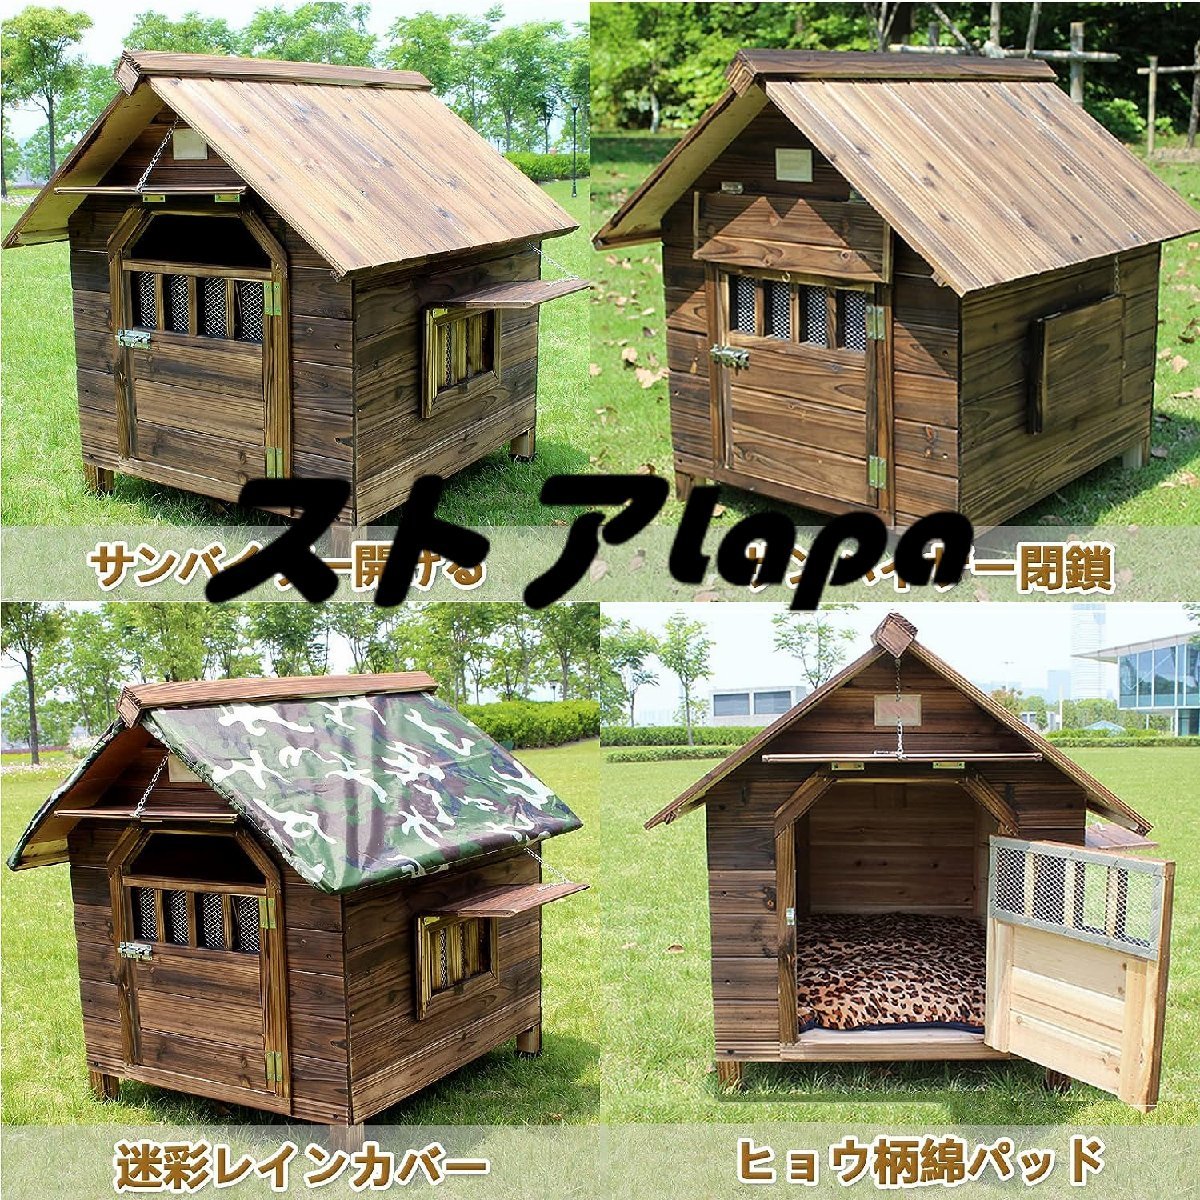  strongly recommendation kennel large dog roof door attaching enduring charcoal acid .. corrosion . warm all weather type sunburn measures . manner rain guard construction easy ventilation stable . durability L938